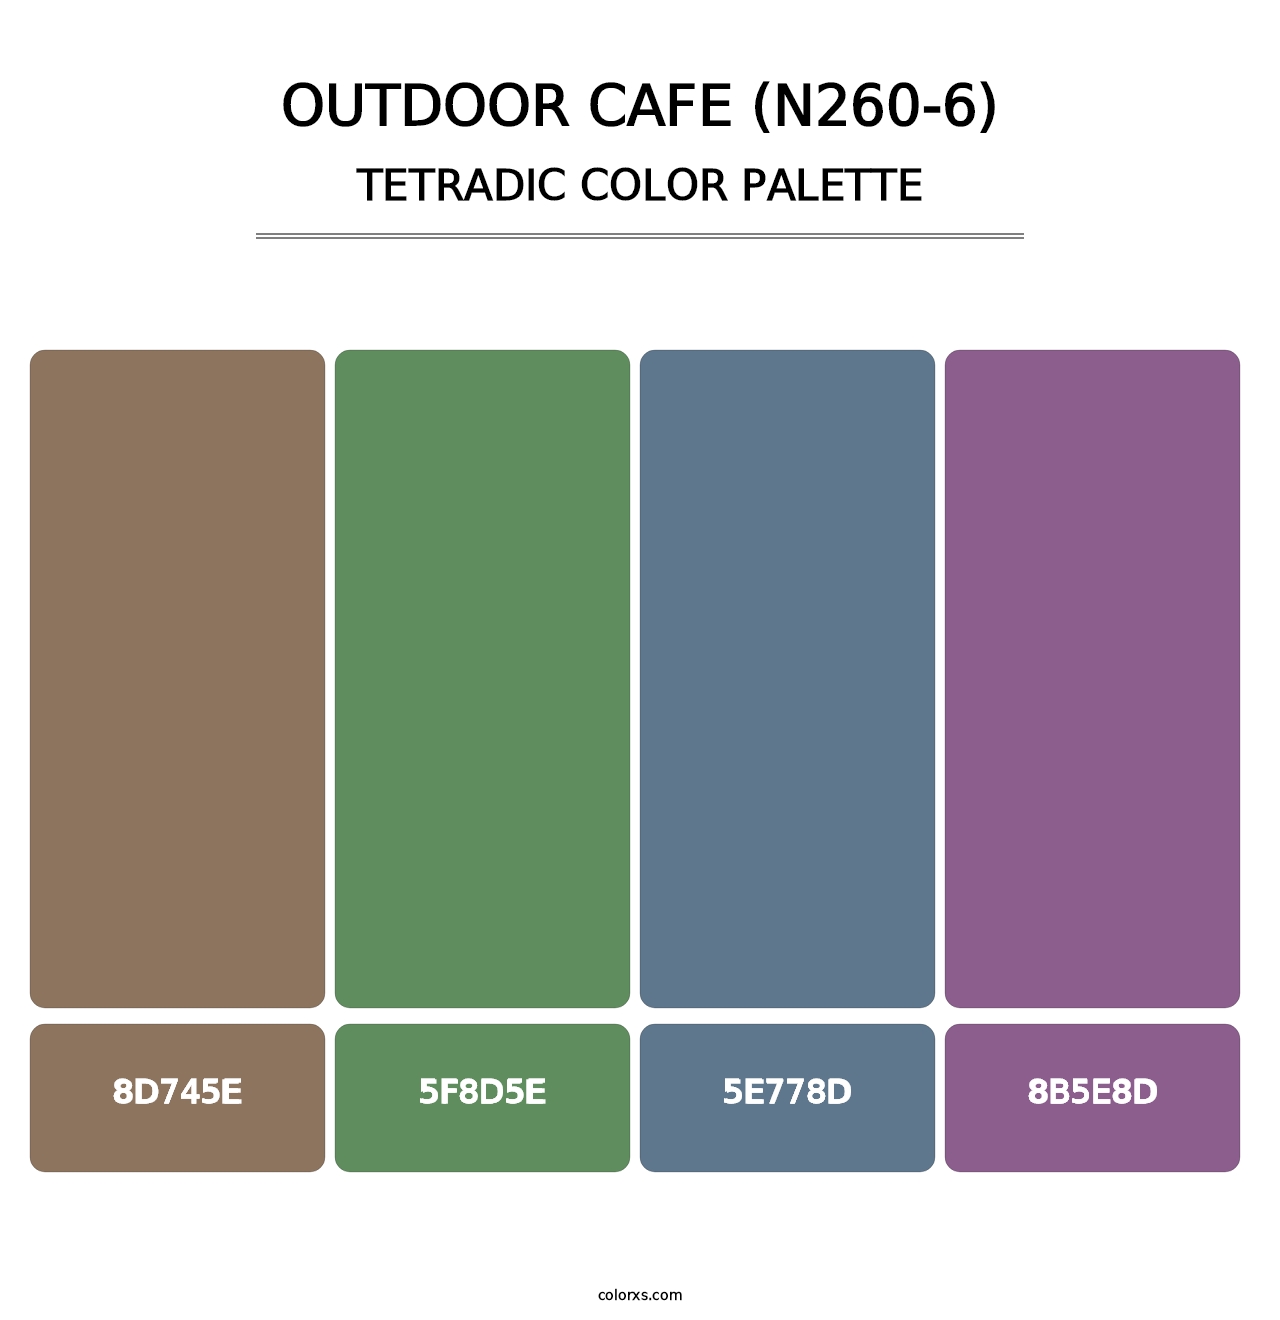 Outdoor Cafe (N260-6) - Tetradic Color Palette